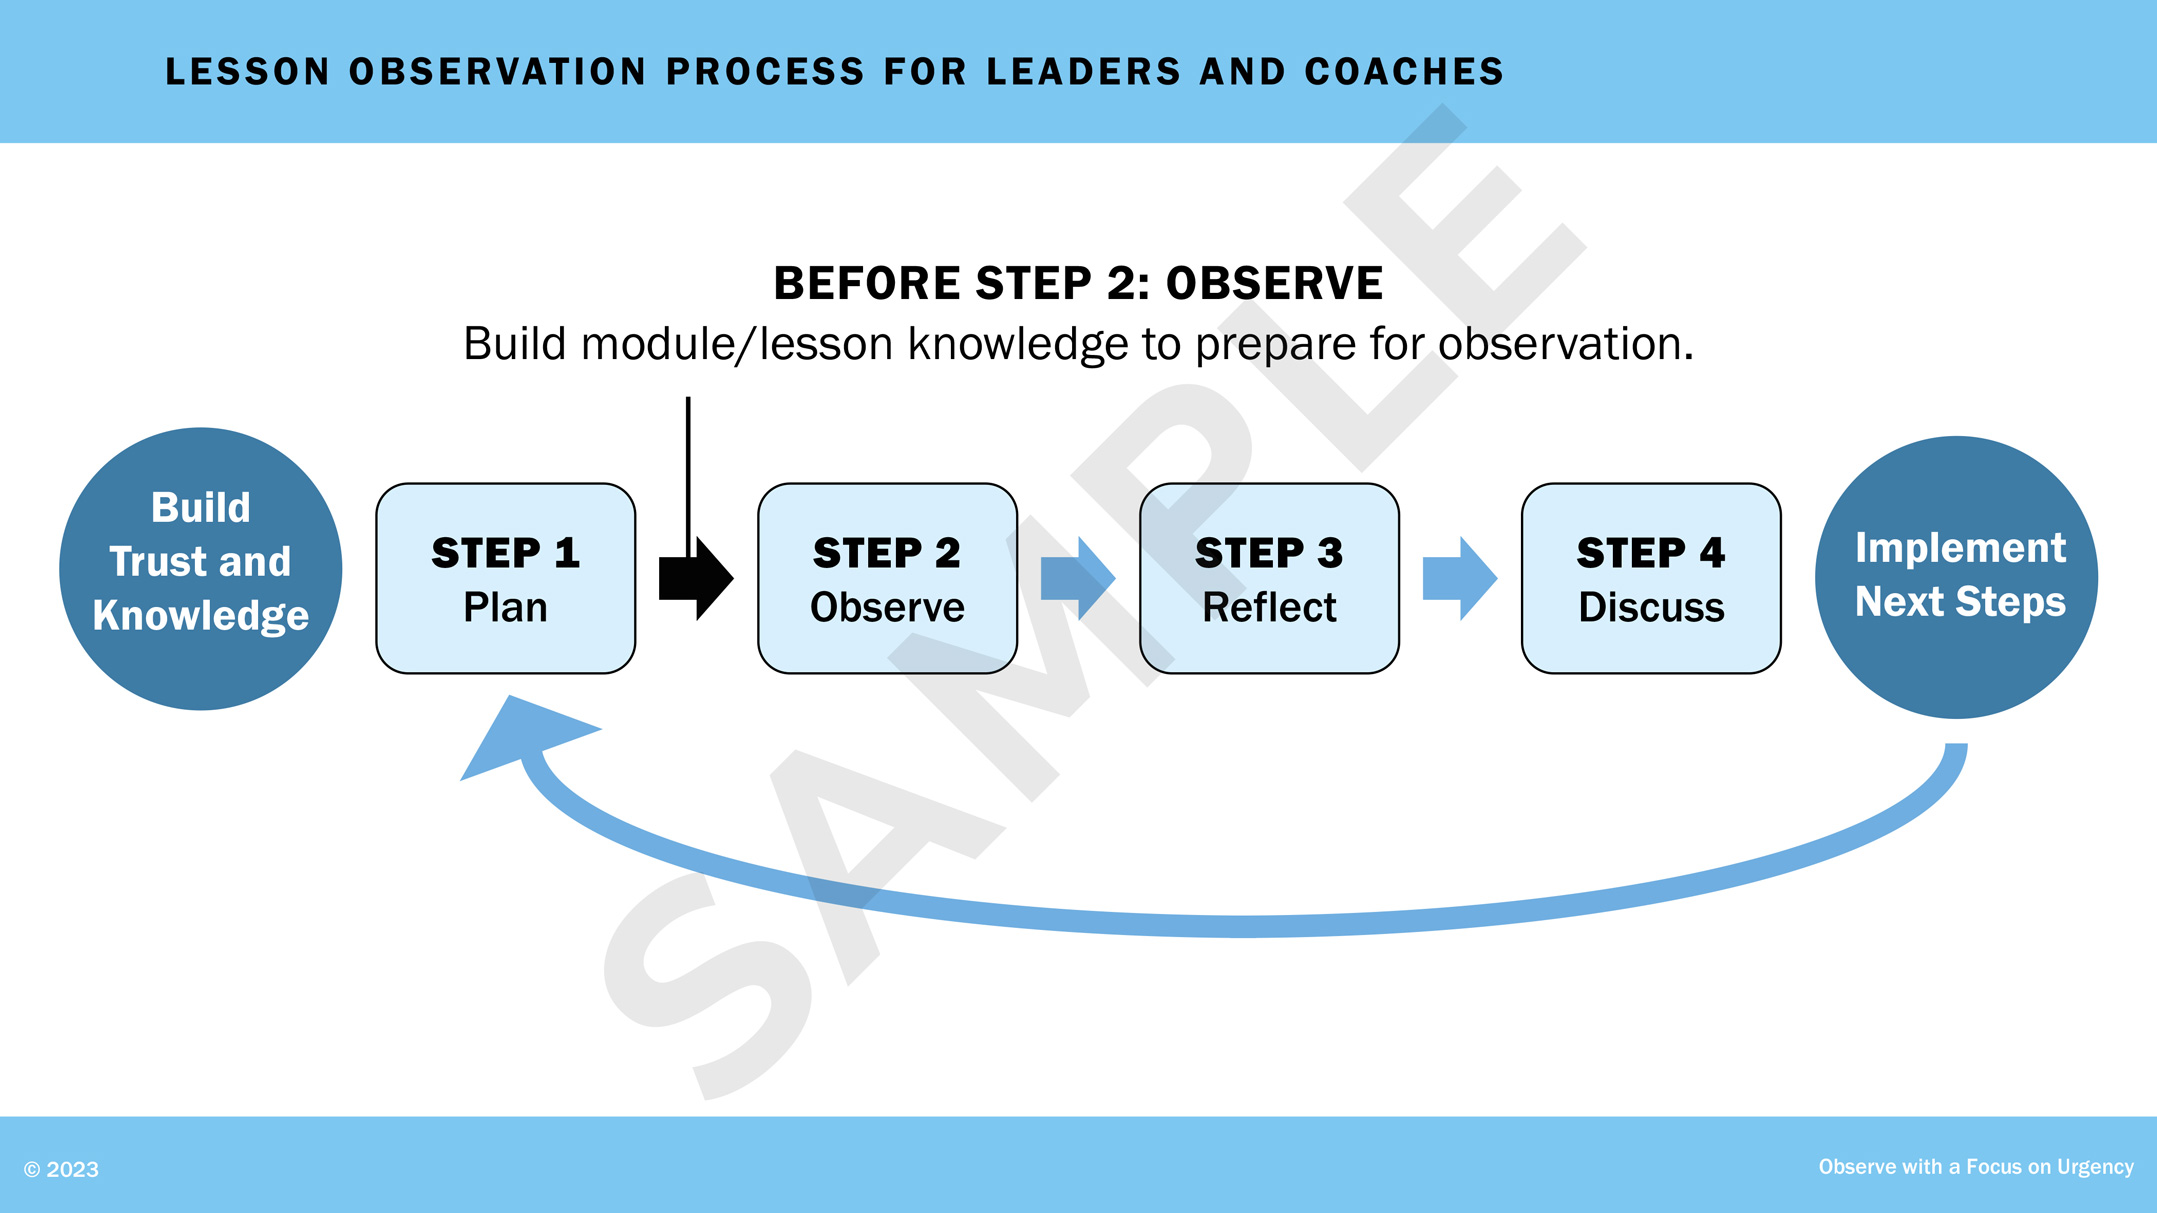 Slide from a PowerPoint presentation for a learning series for teachers. A flow chart shows the steps in the lesson observation process: build trust and knowledge, plan, observe, reflect, discuss, and implement next steps. The arrow between 'plan' and 'observe' is highlighted, emphasizing the importance of building knowledge of the lesson to prepare for observation.